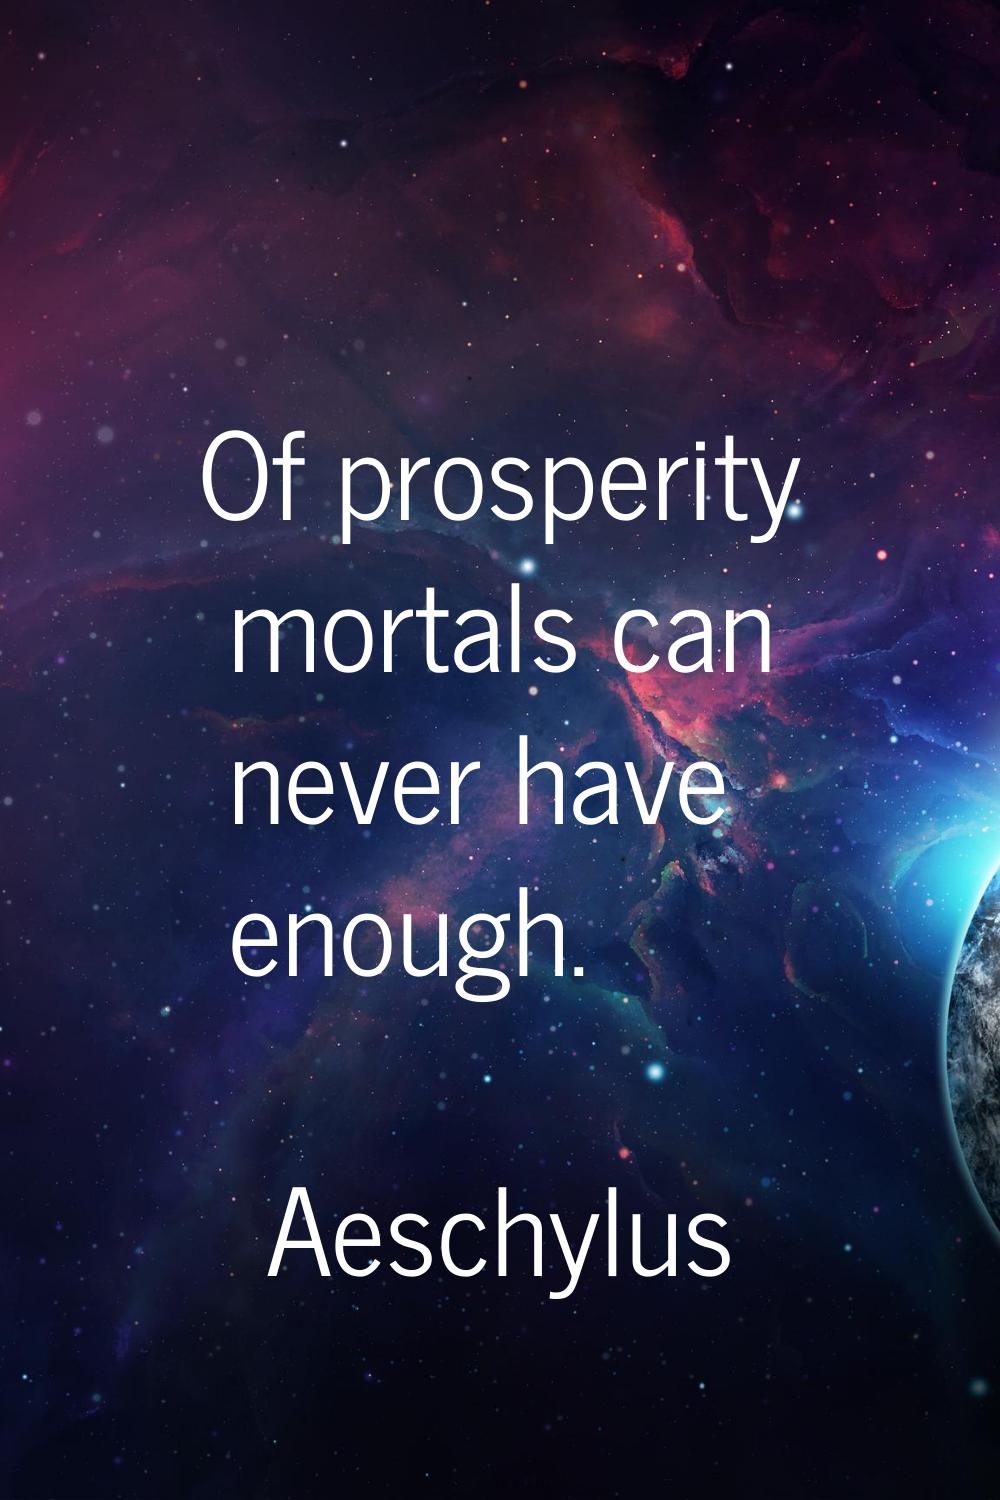 Of prosperity mortals can never have enough.